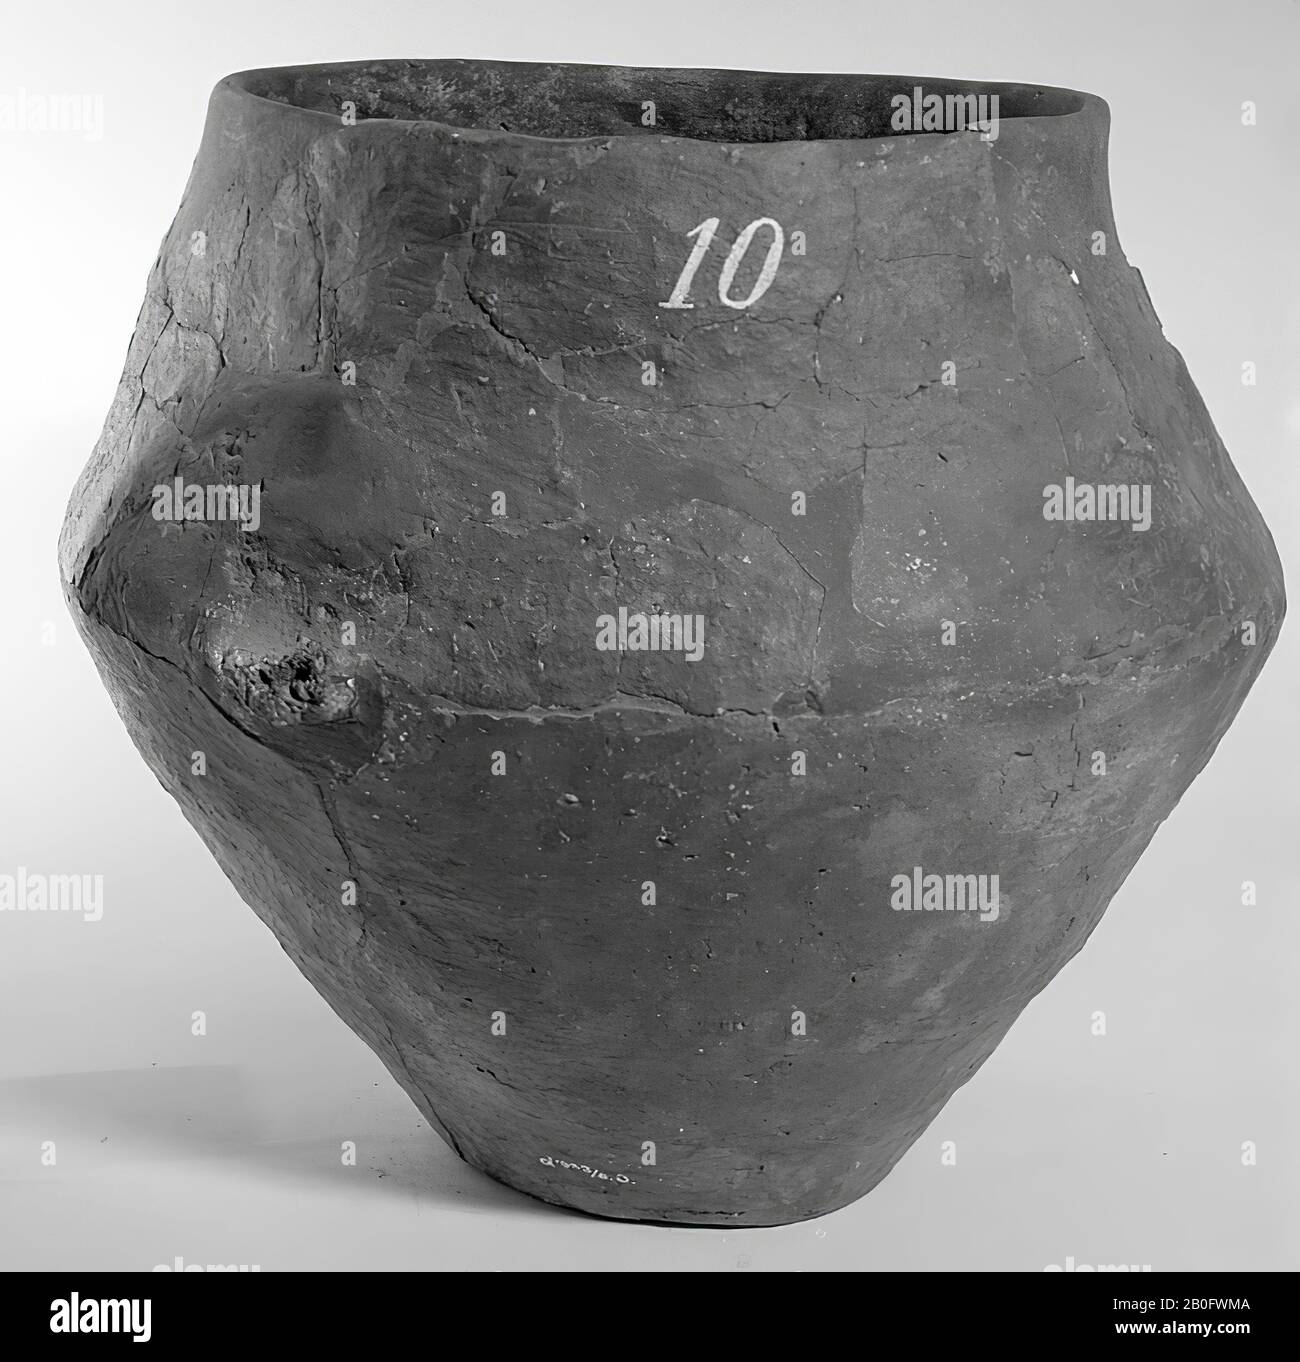 Proto-Saxon urn of earthenware with protrusion, undecorated. Unstable old bonding and additions, cracks, surface damage. Contains cremated residues, urn, earthenware, h: 25 cm, diam: 29 cm, prehistory -1200 Stock Photo